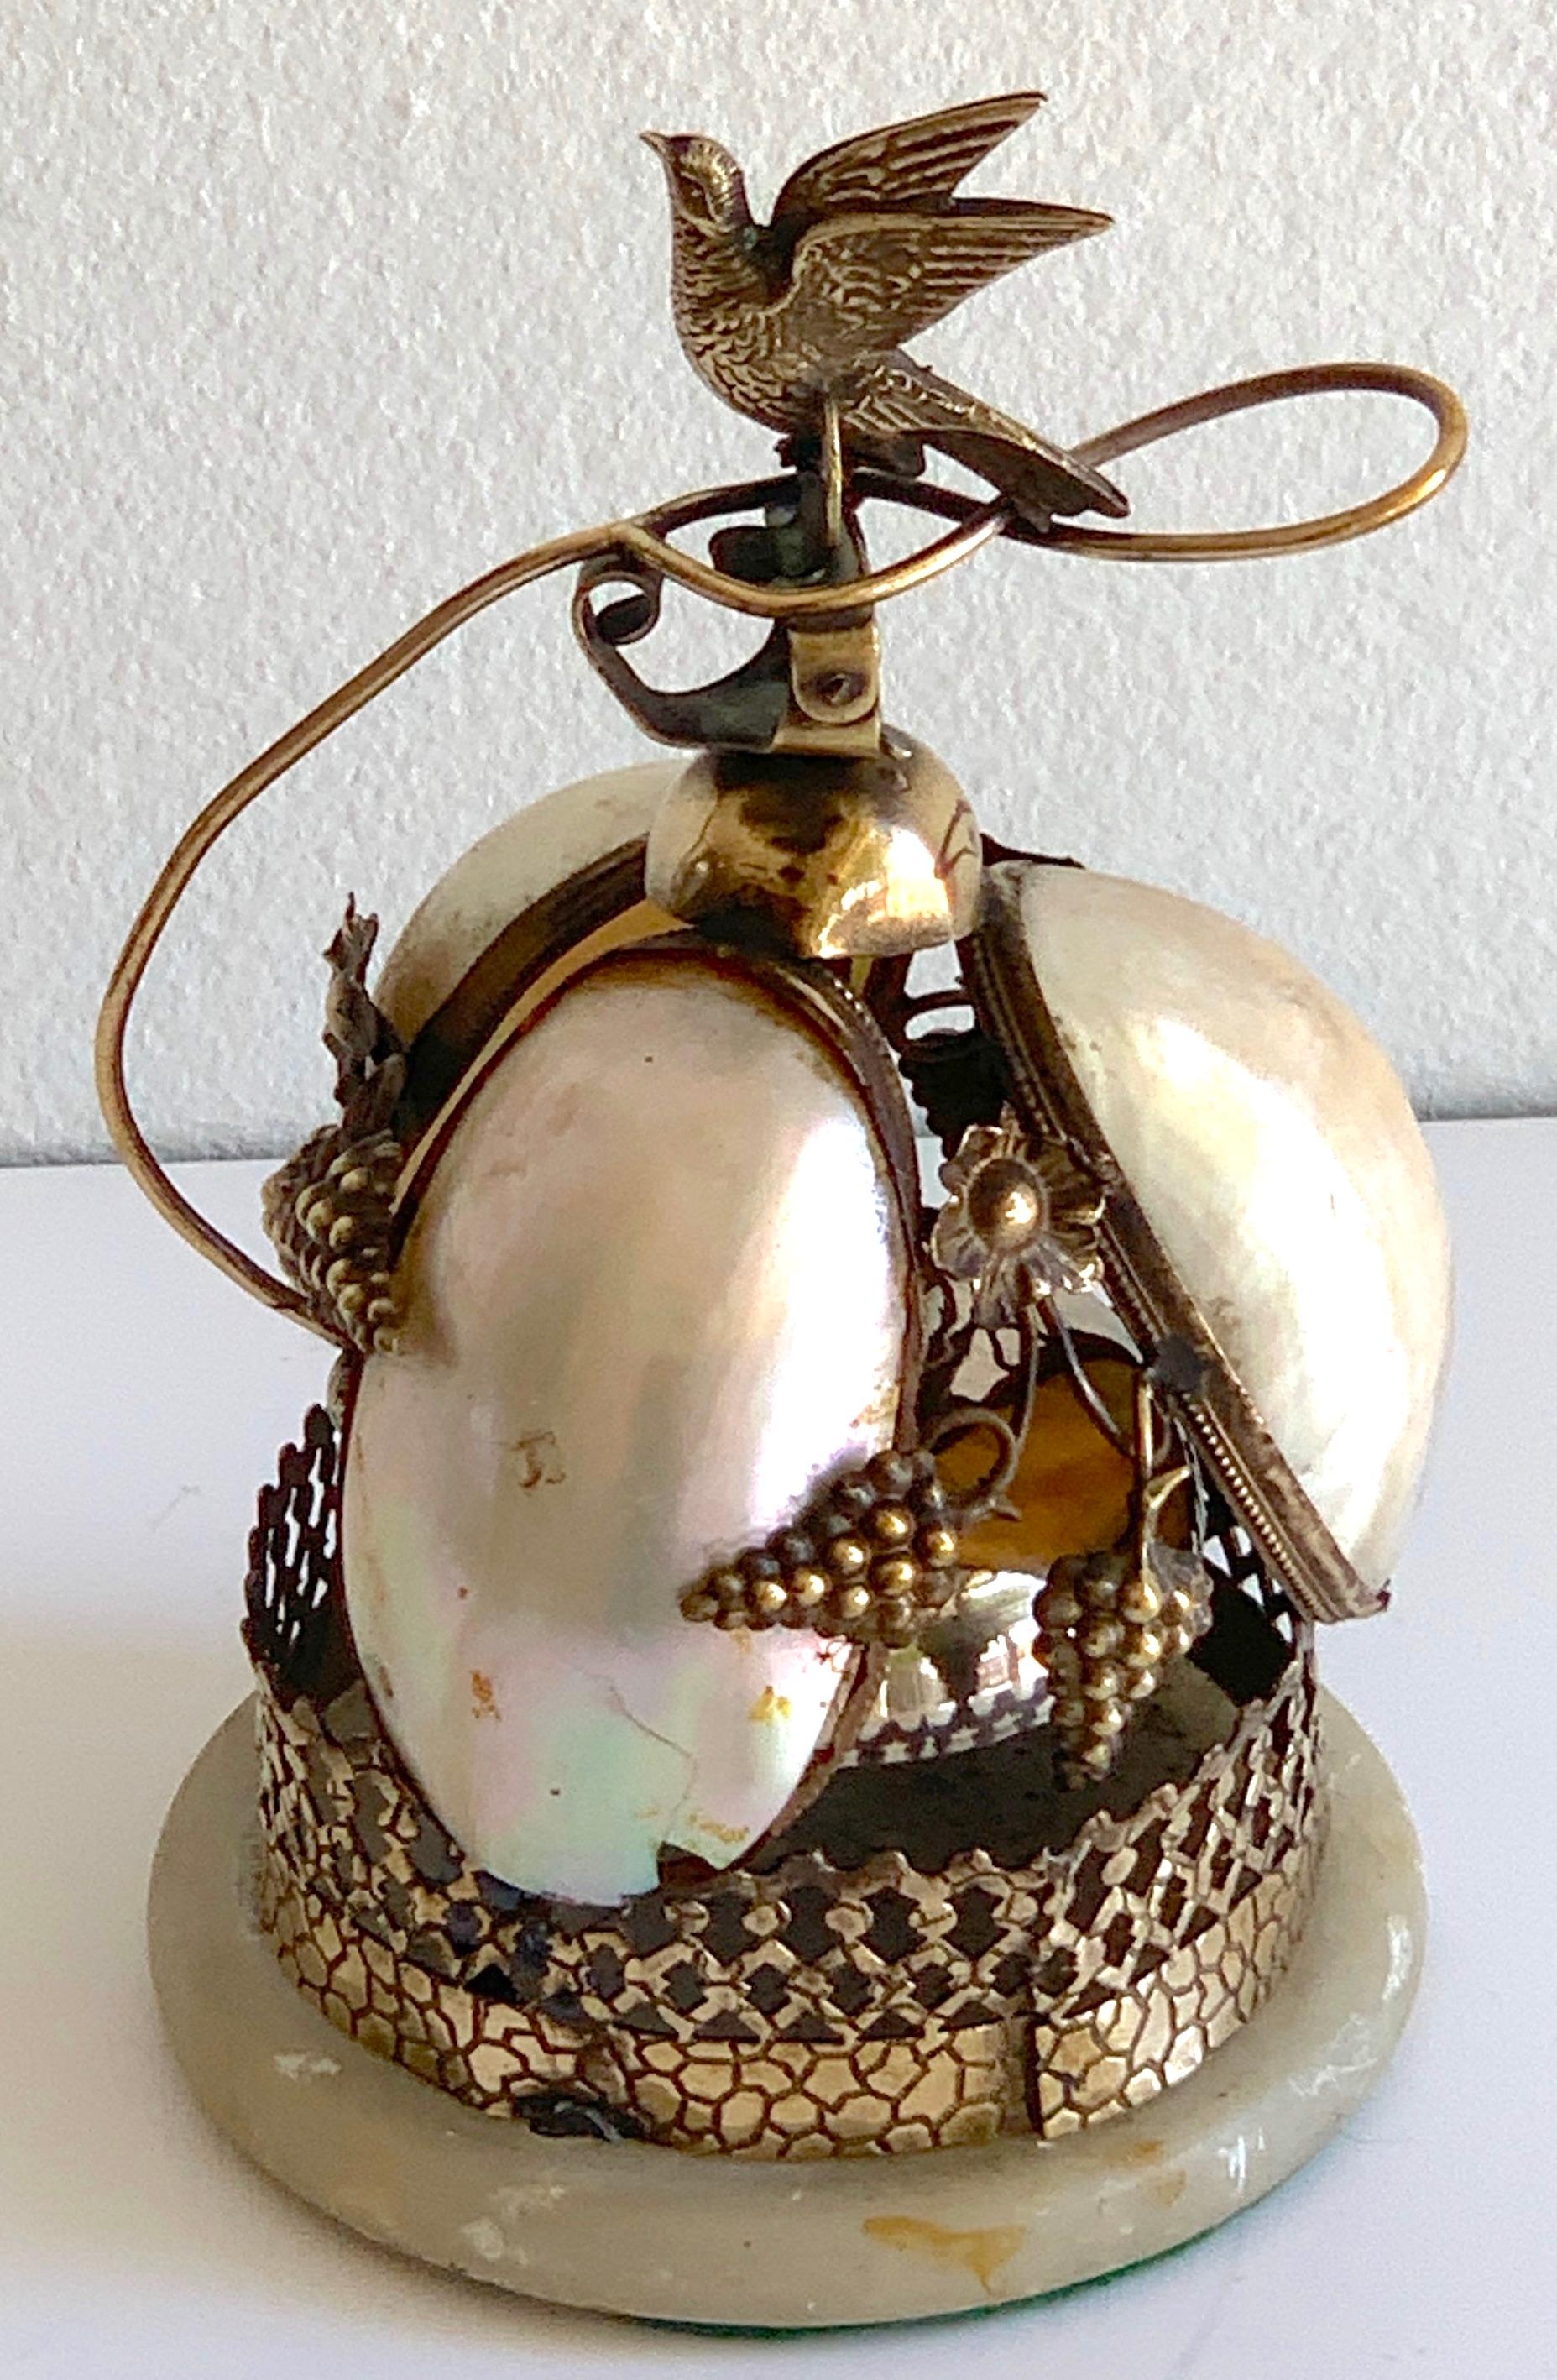 Victorian Brass & Mother of Pearl Bird Motif Table Bell, With a Flying bird handle above three luminous mother of pearl shells, concealing the steel bell, raised on a circular marble base.
Professionally Polished Brass, Working order.